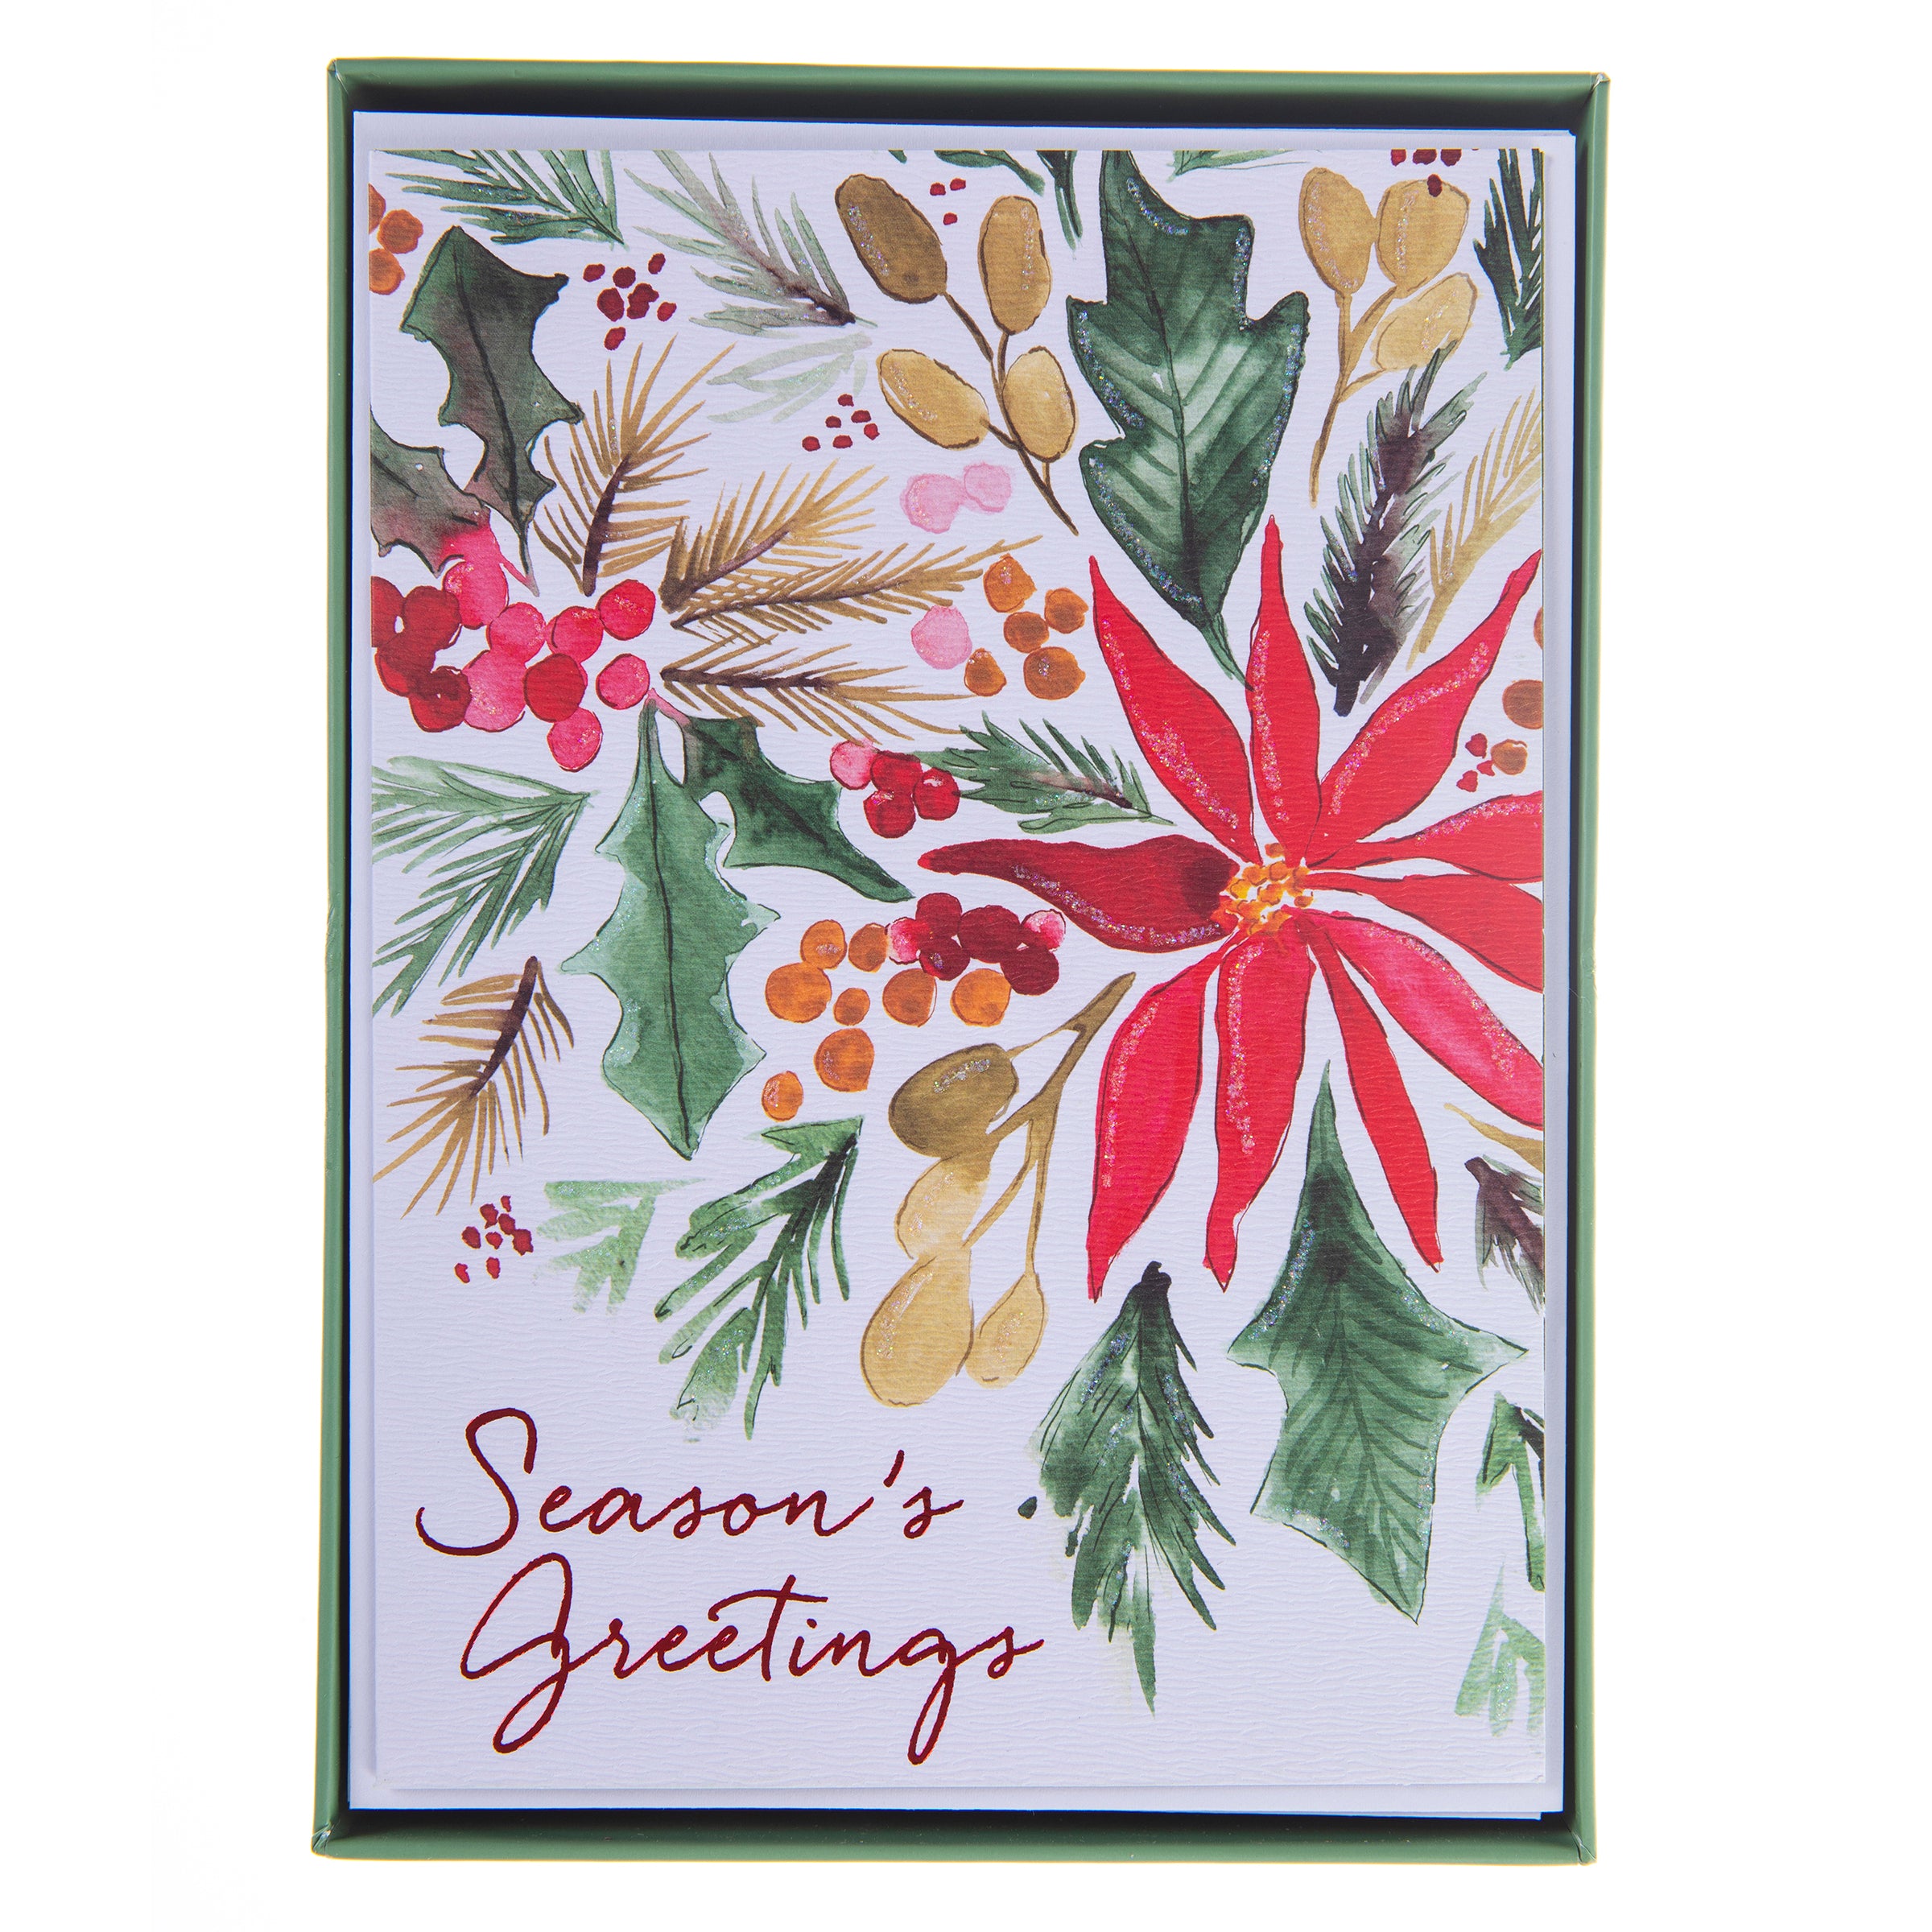 Poinsettia Boxed Holiday Cards | 15 ct | White, Green, & Red | Includes ...